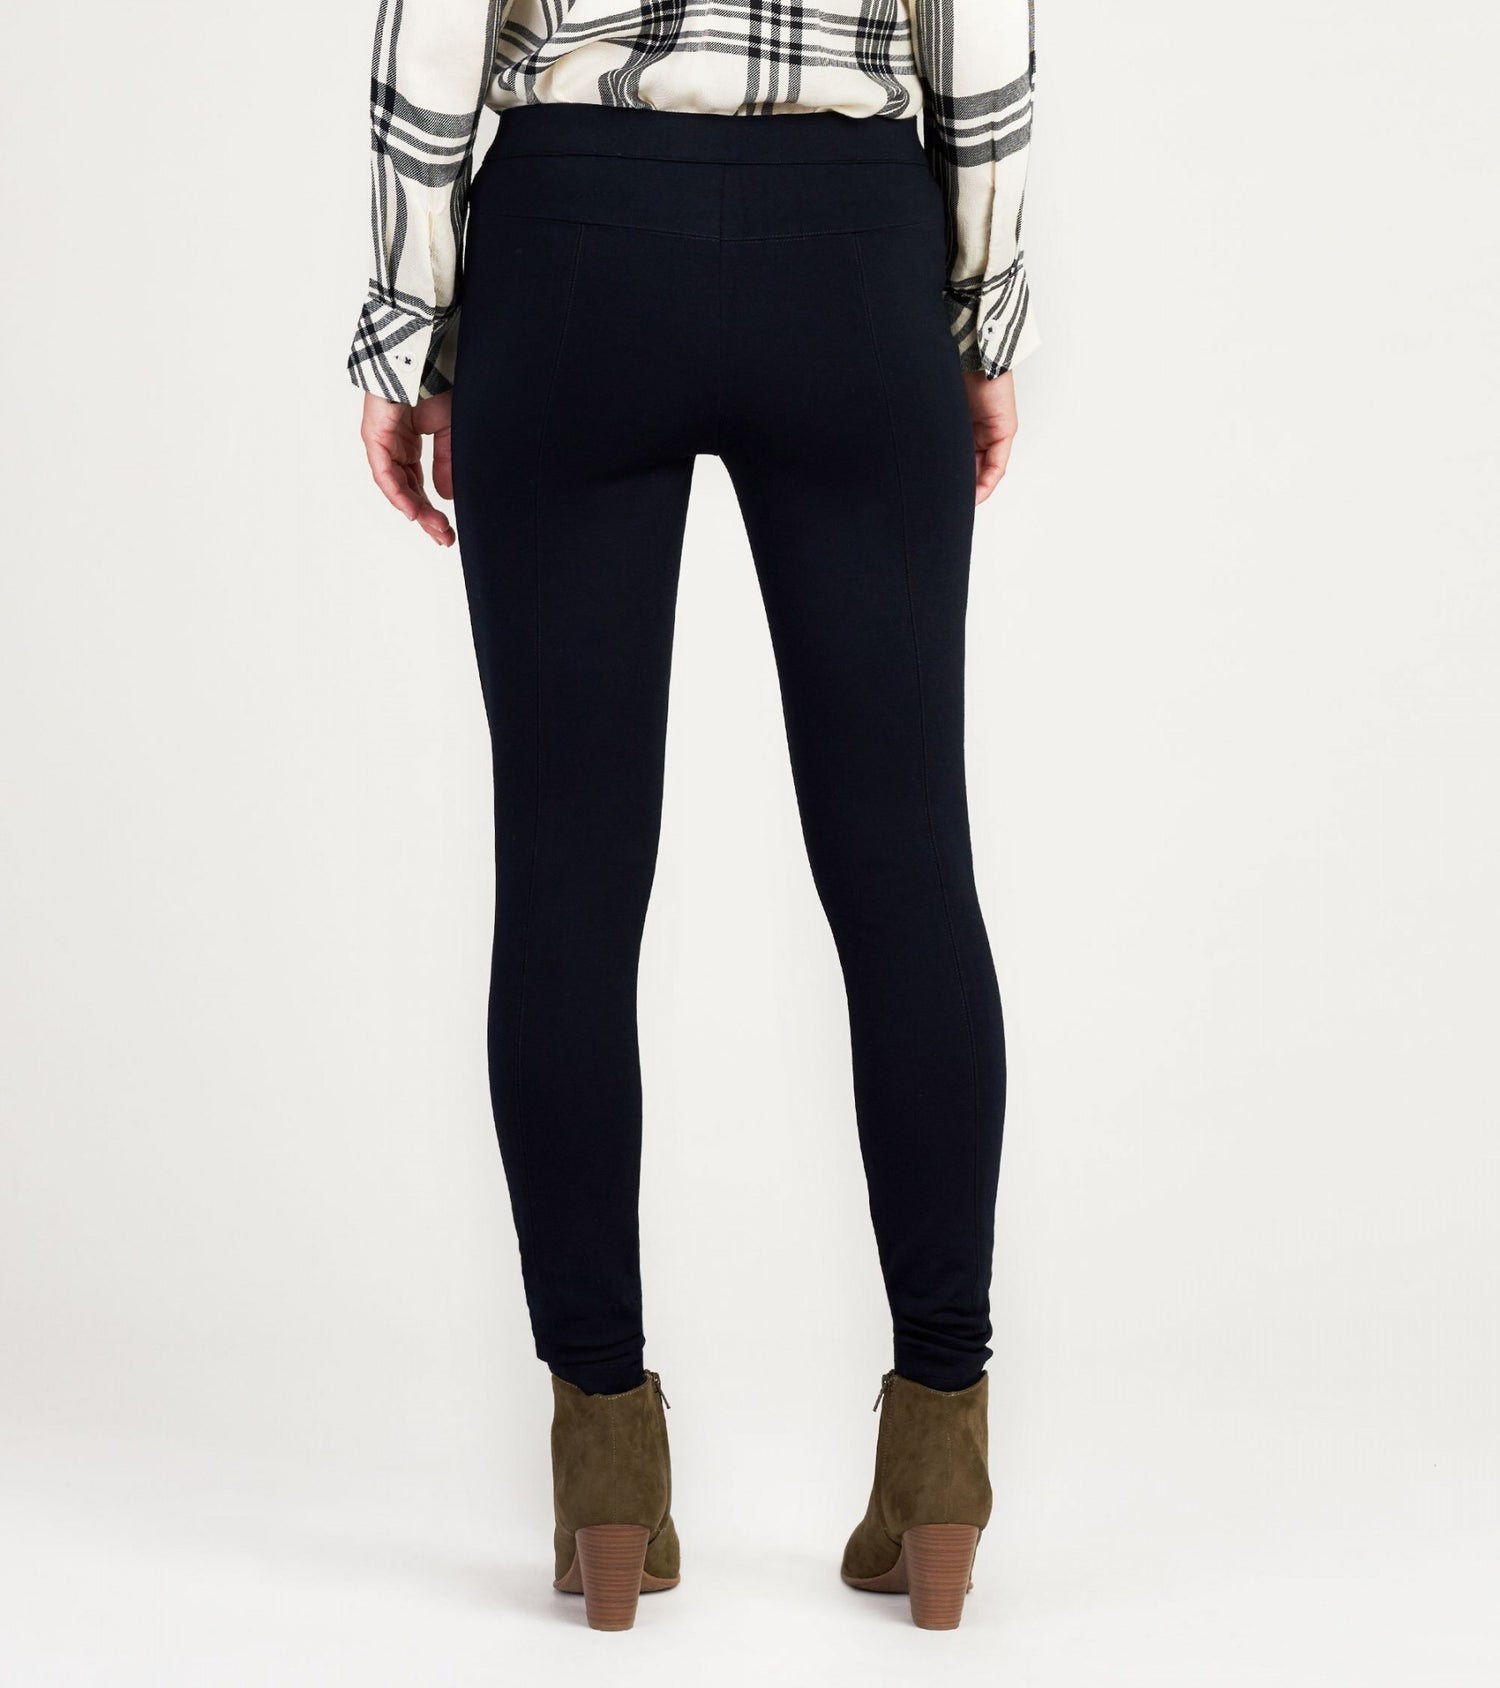 Hatley Black Smart Skinny Pants - Sands Boutique clothing and gifts